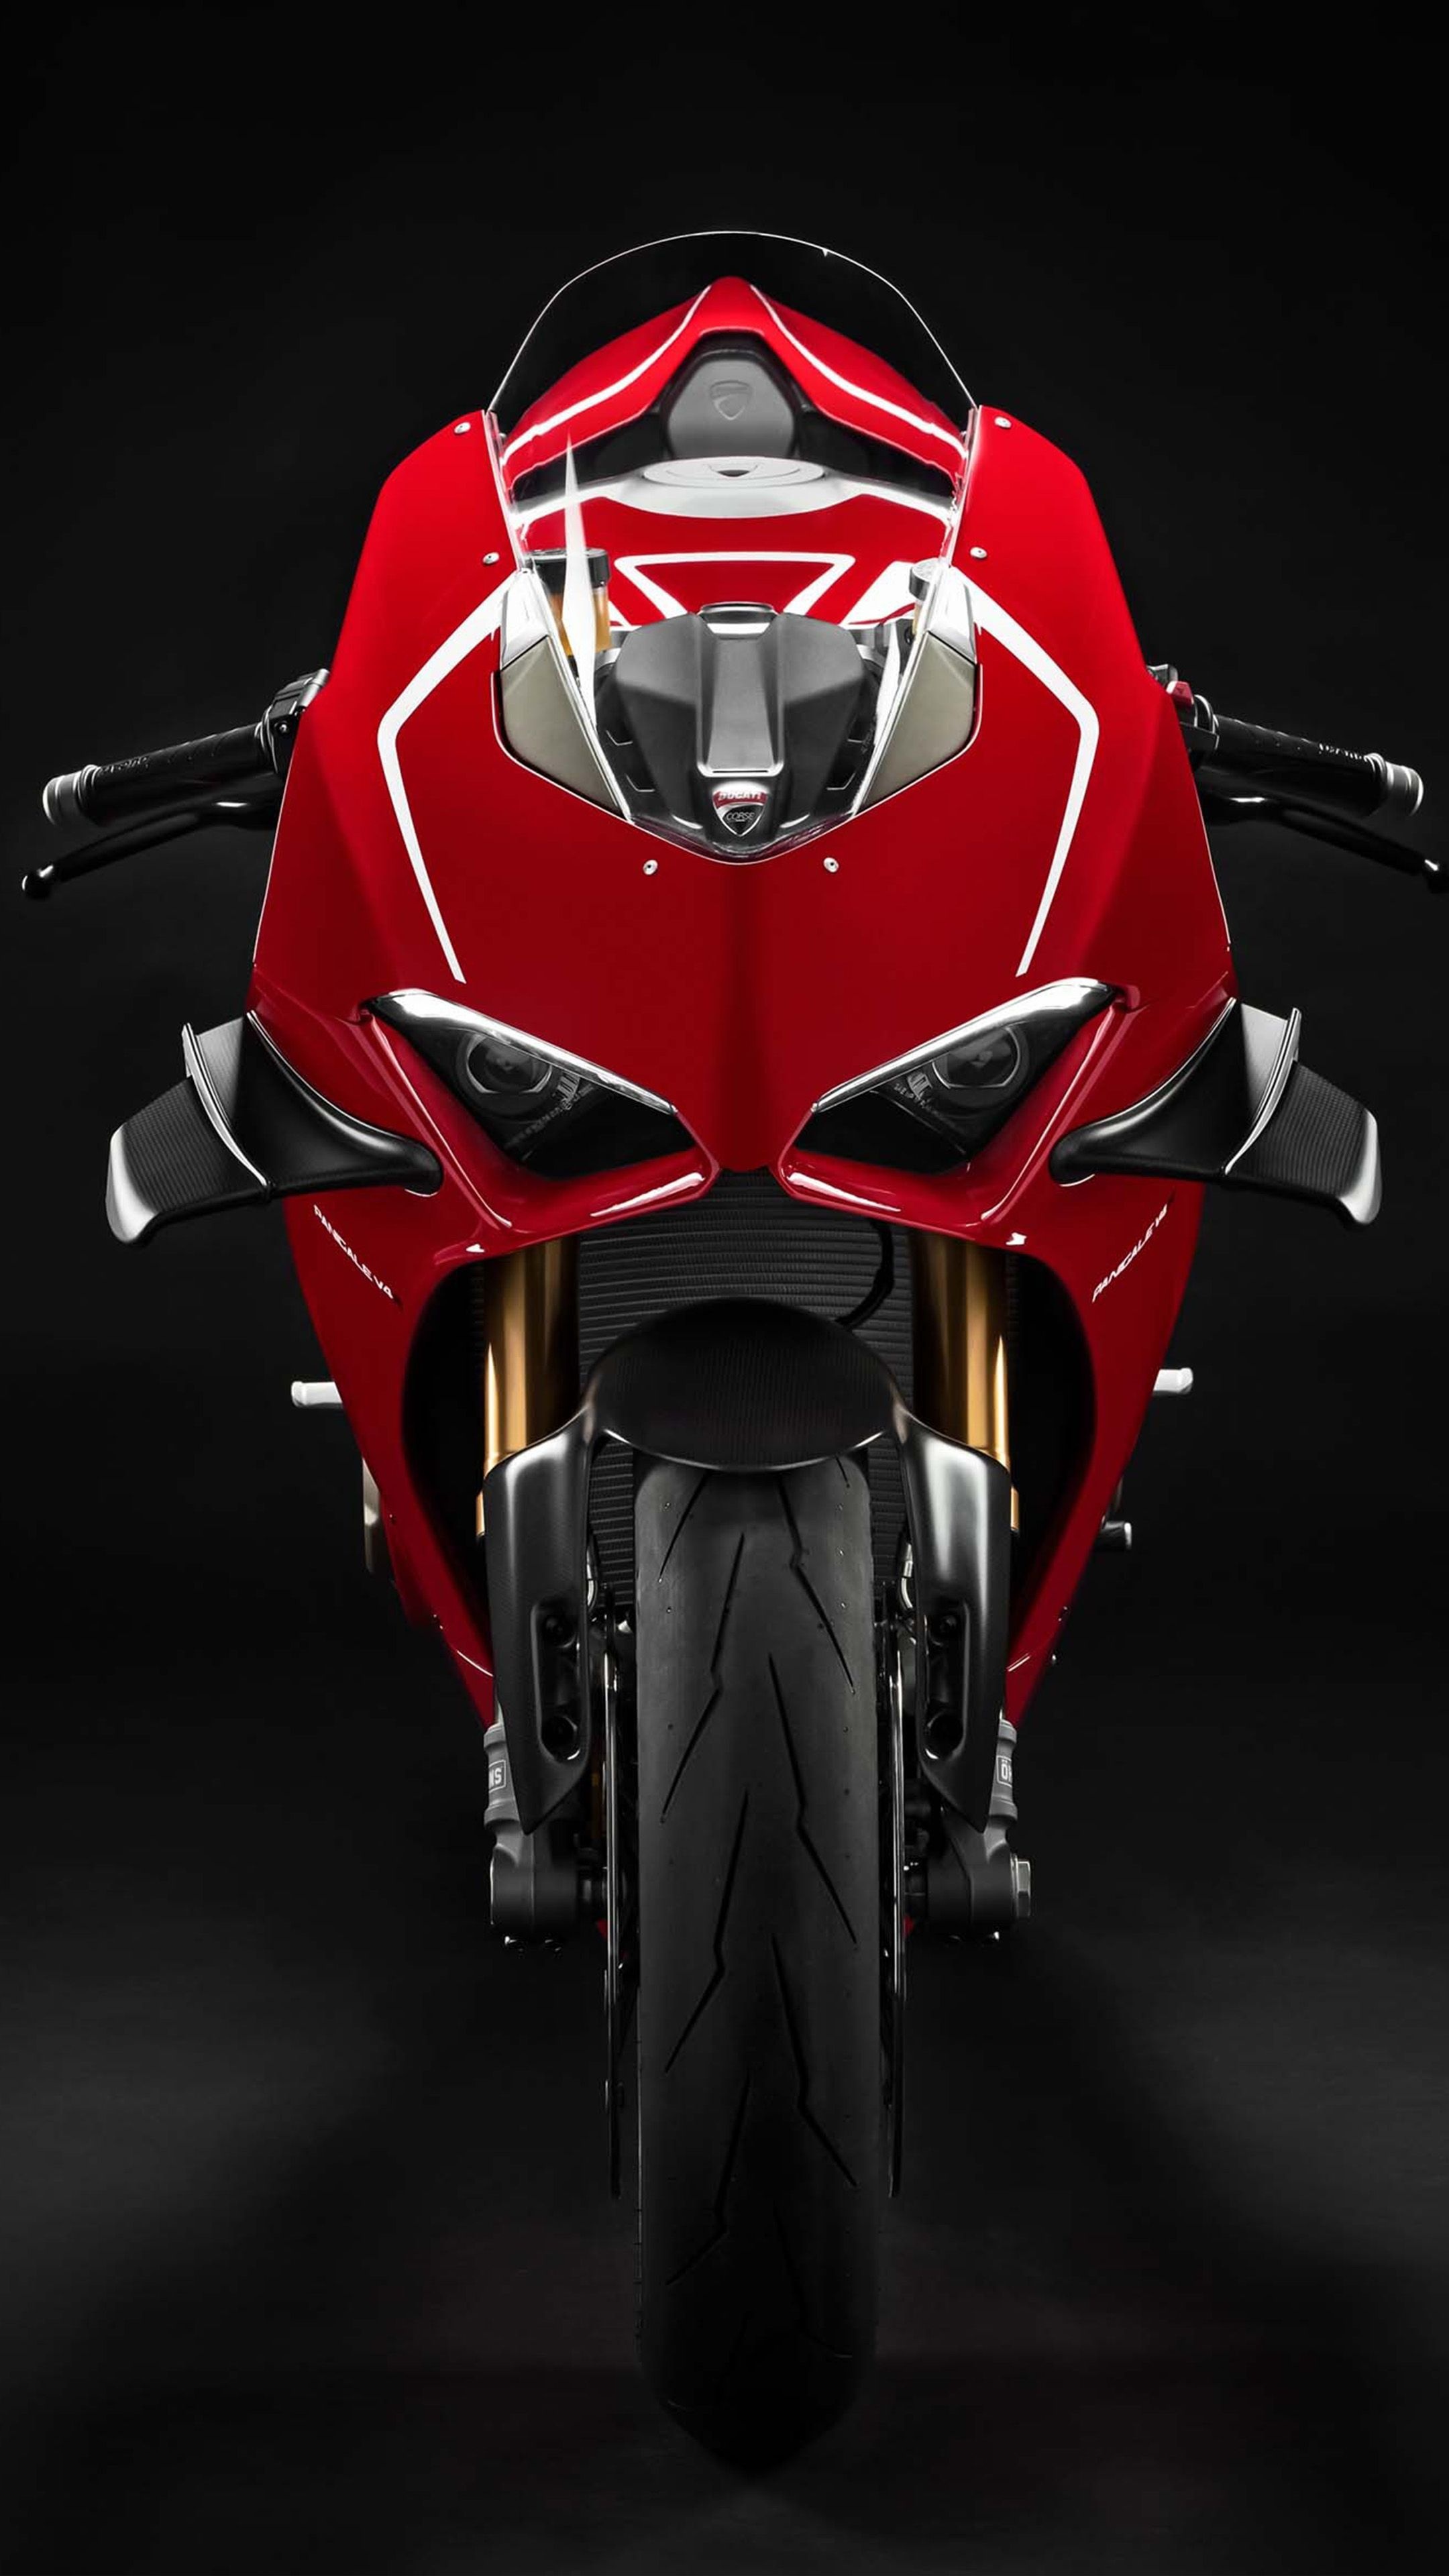 Ducati Panigale V4, Streetfighter V4 wallpapers, High-quality backgrounds, Panigale fans, 2160x3840 4K Phone